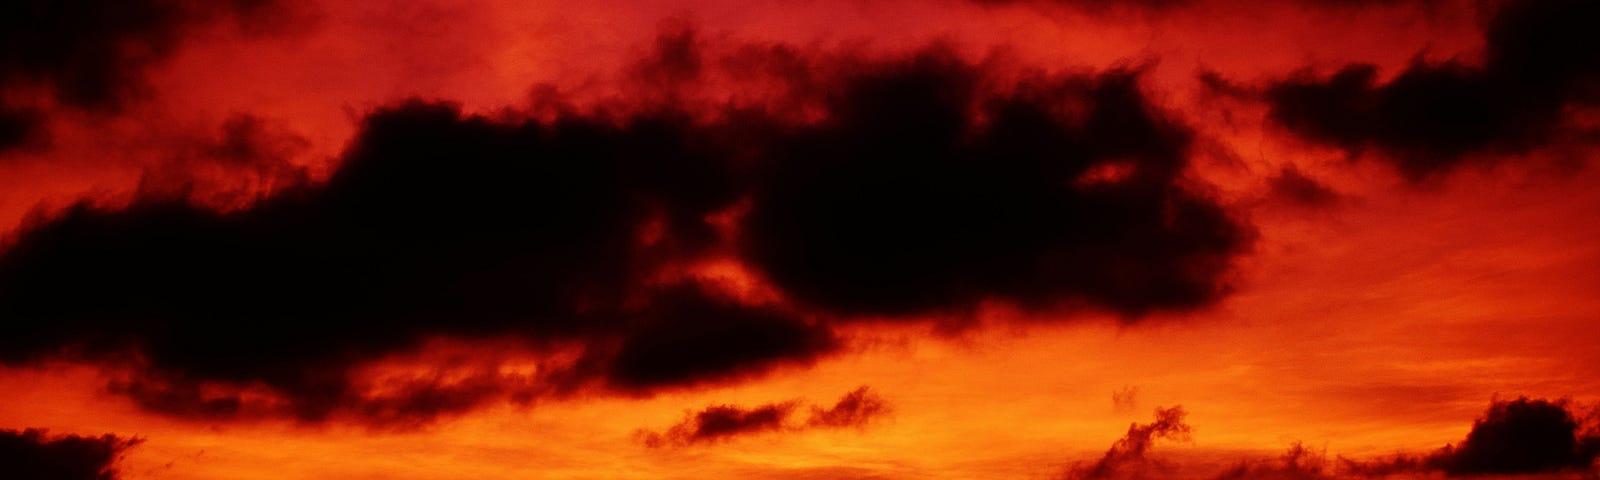 Black clouds in a red sky, indicating impending doom.